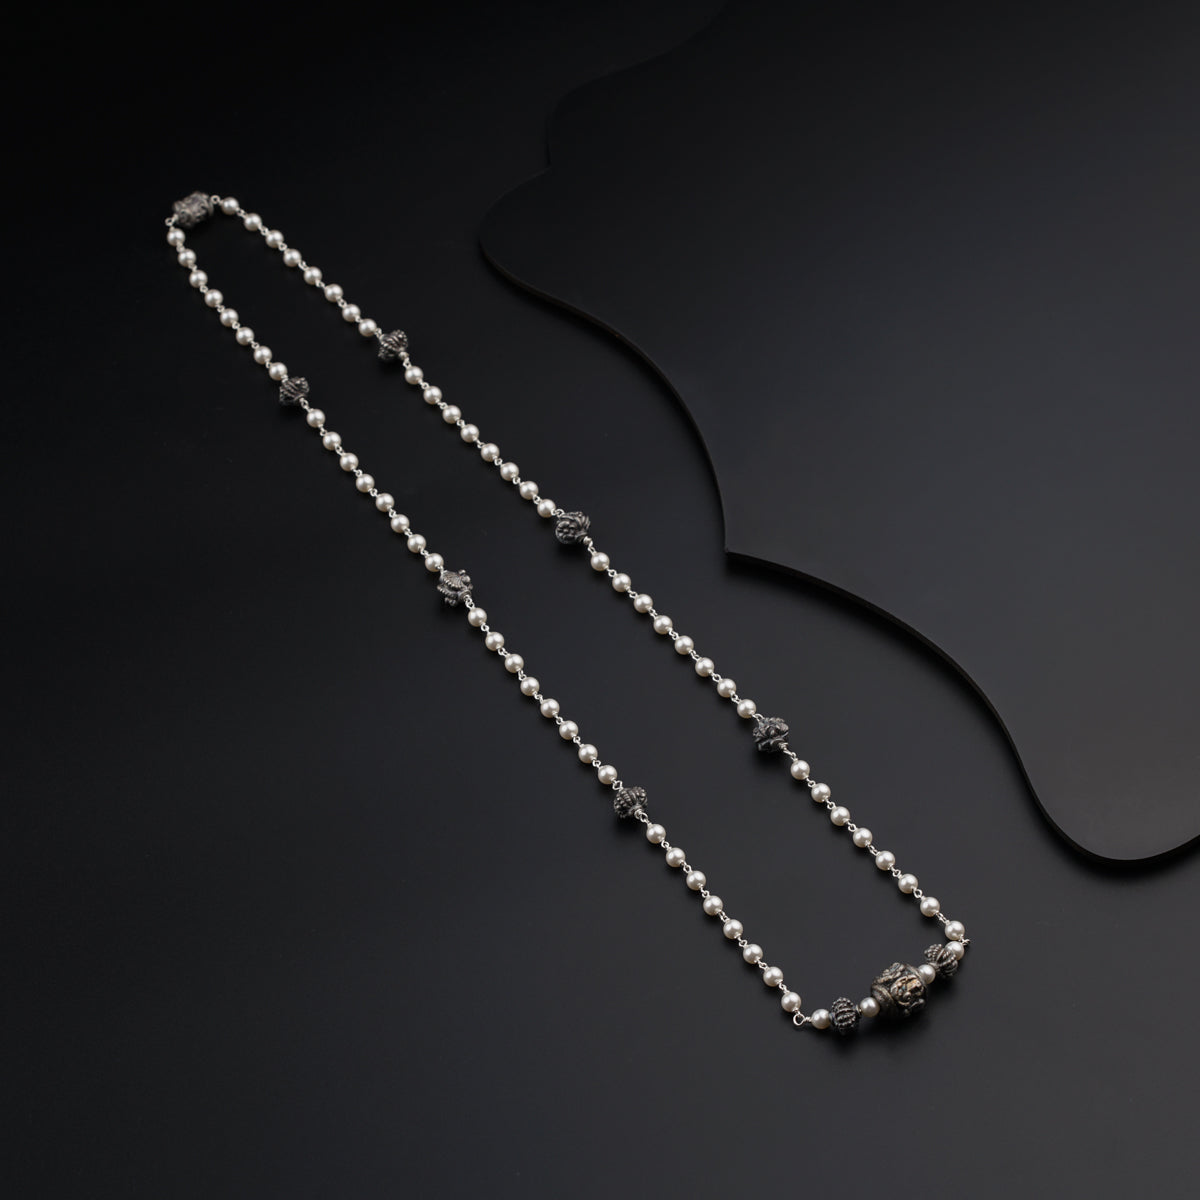 Silver Beads and Pearls Necklace